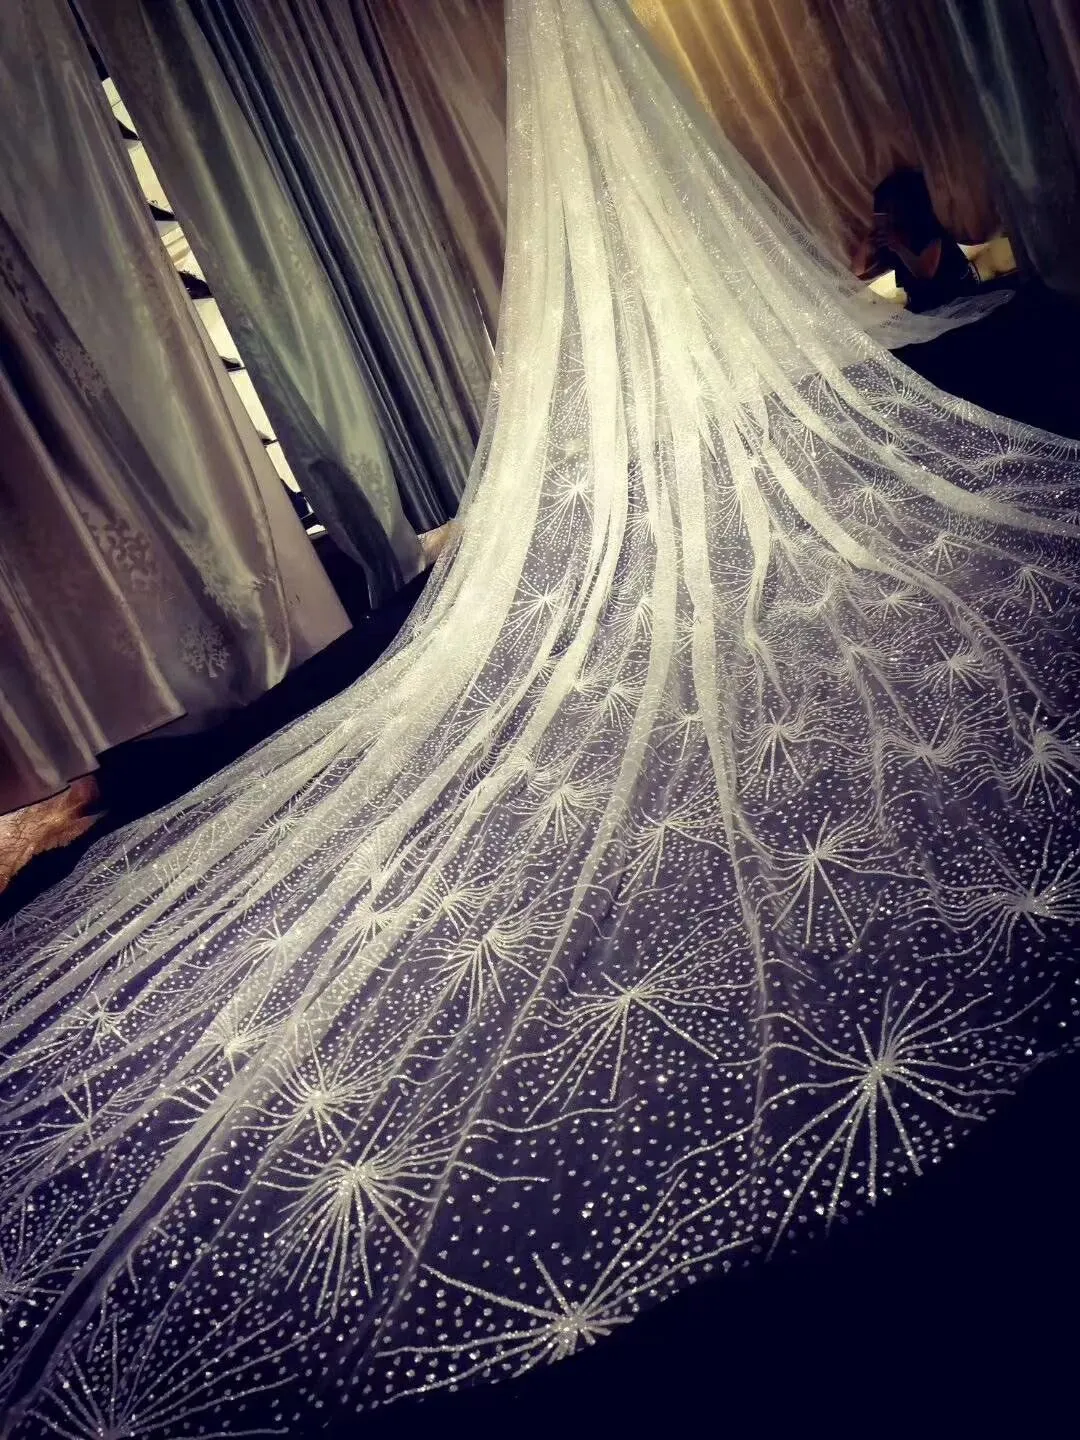 2019 Sparkly Bling Bling Bridal Veil Cathedral Train 3 meter Luxury Shiny Wedding Party Bridal Vit White Champagne228p